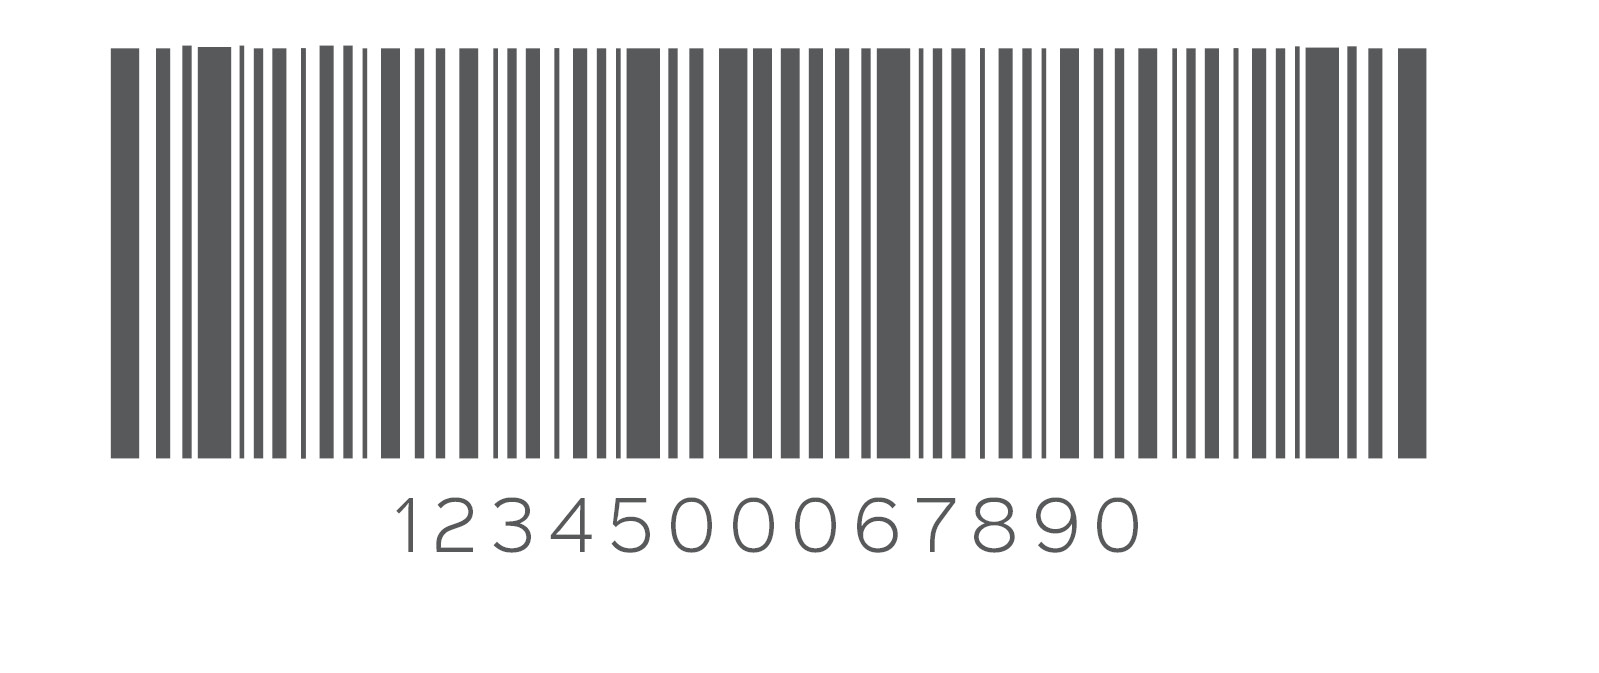 Creating a Barcode Generator Inventor 2 - source for you